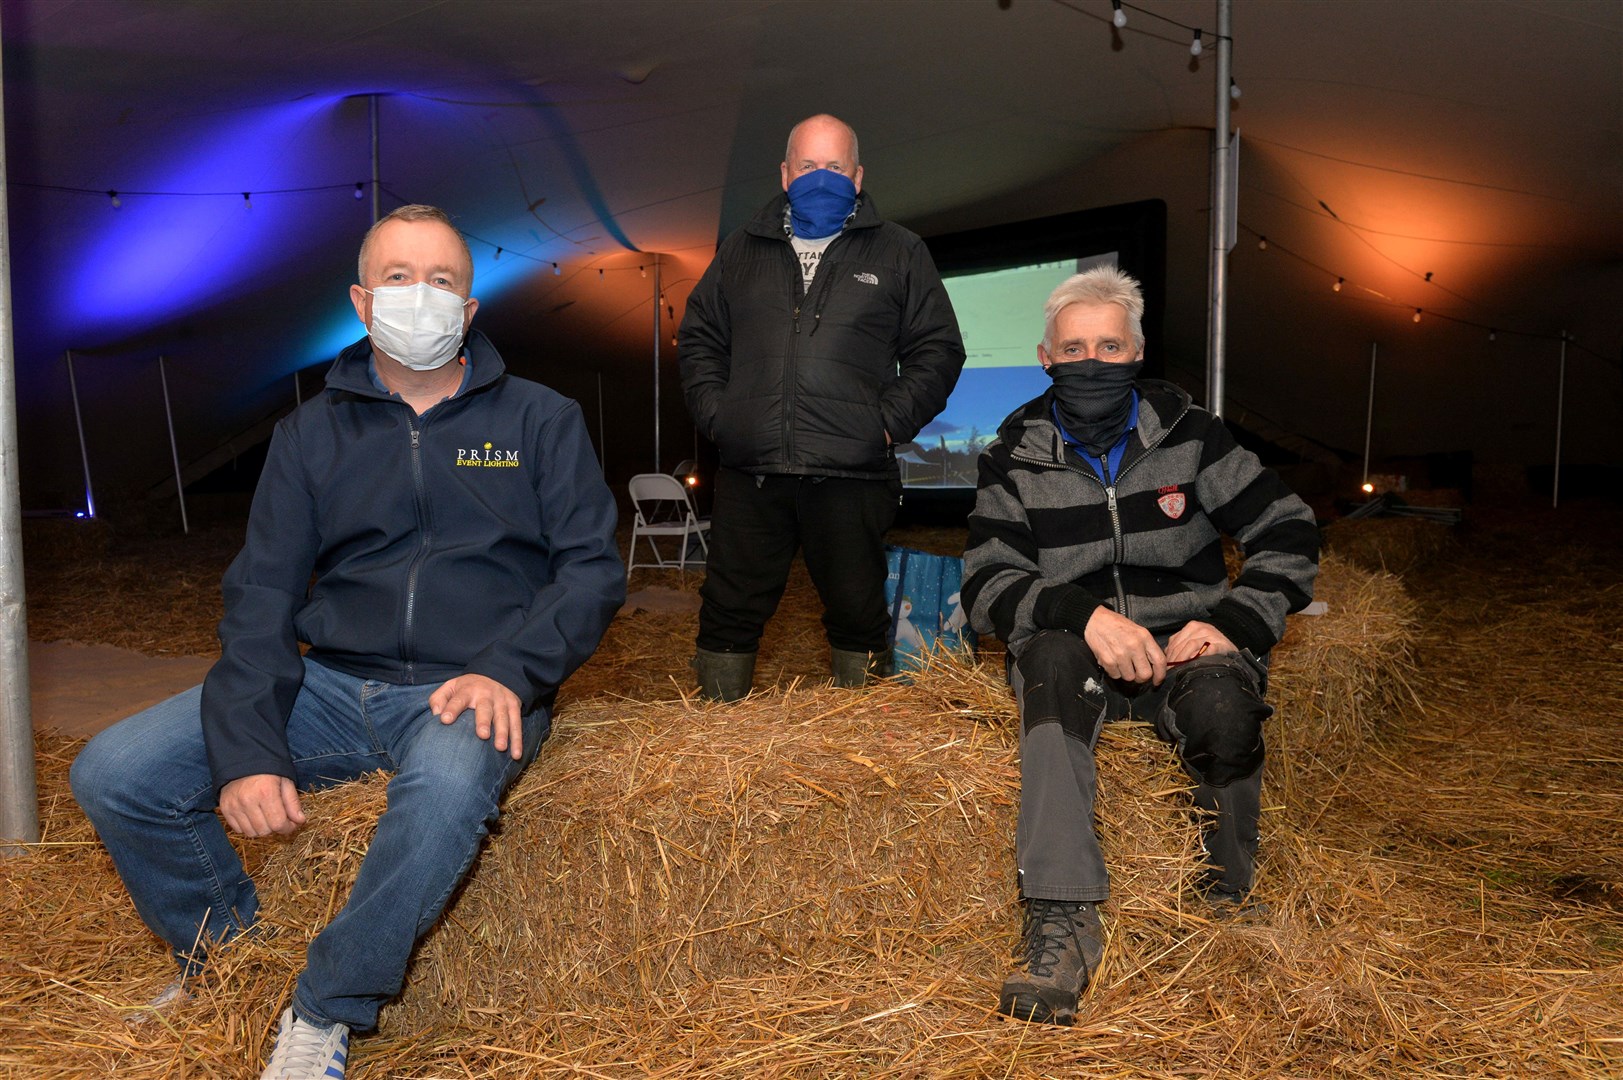 The Field movie night with Keith Bauer from Prism lighting, volunteer Gordon Robertson and John Douglas. Picture: Callum Mackay